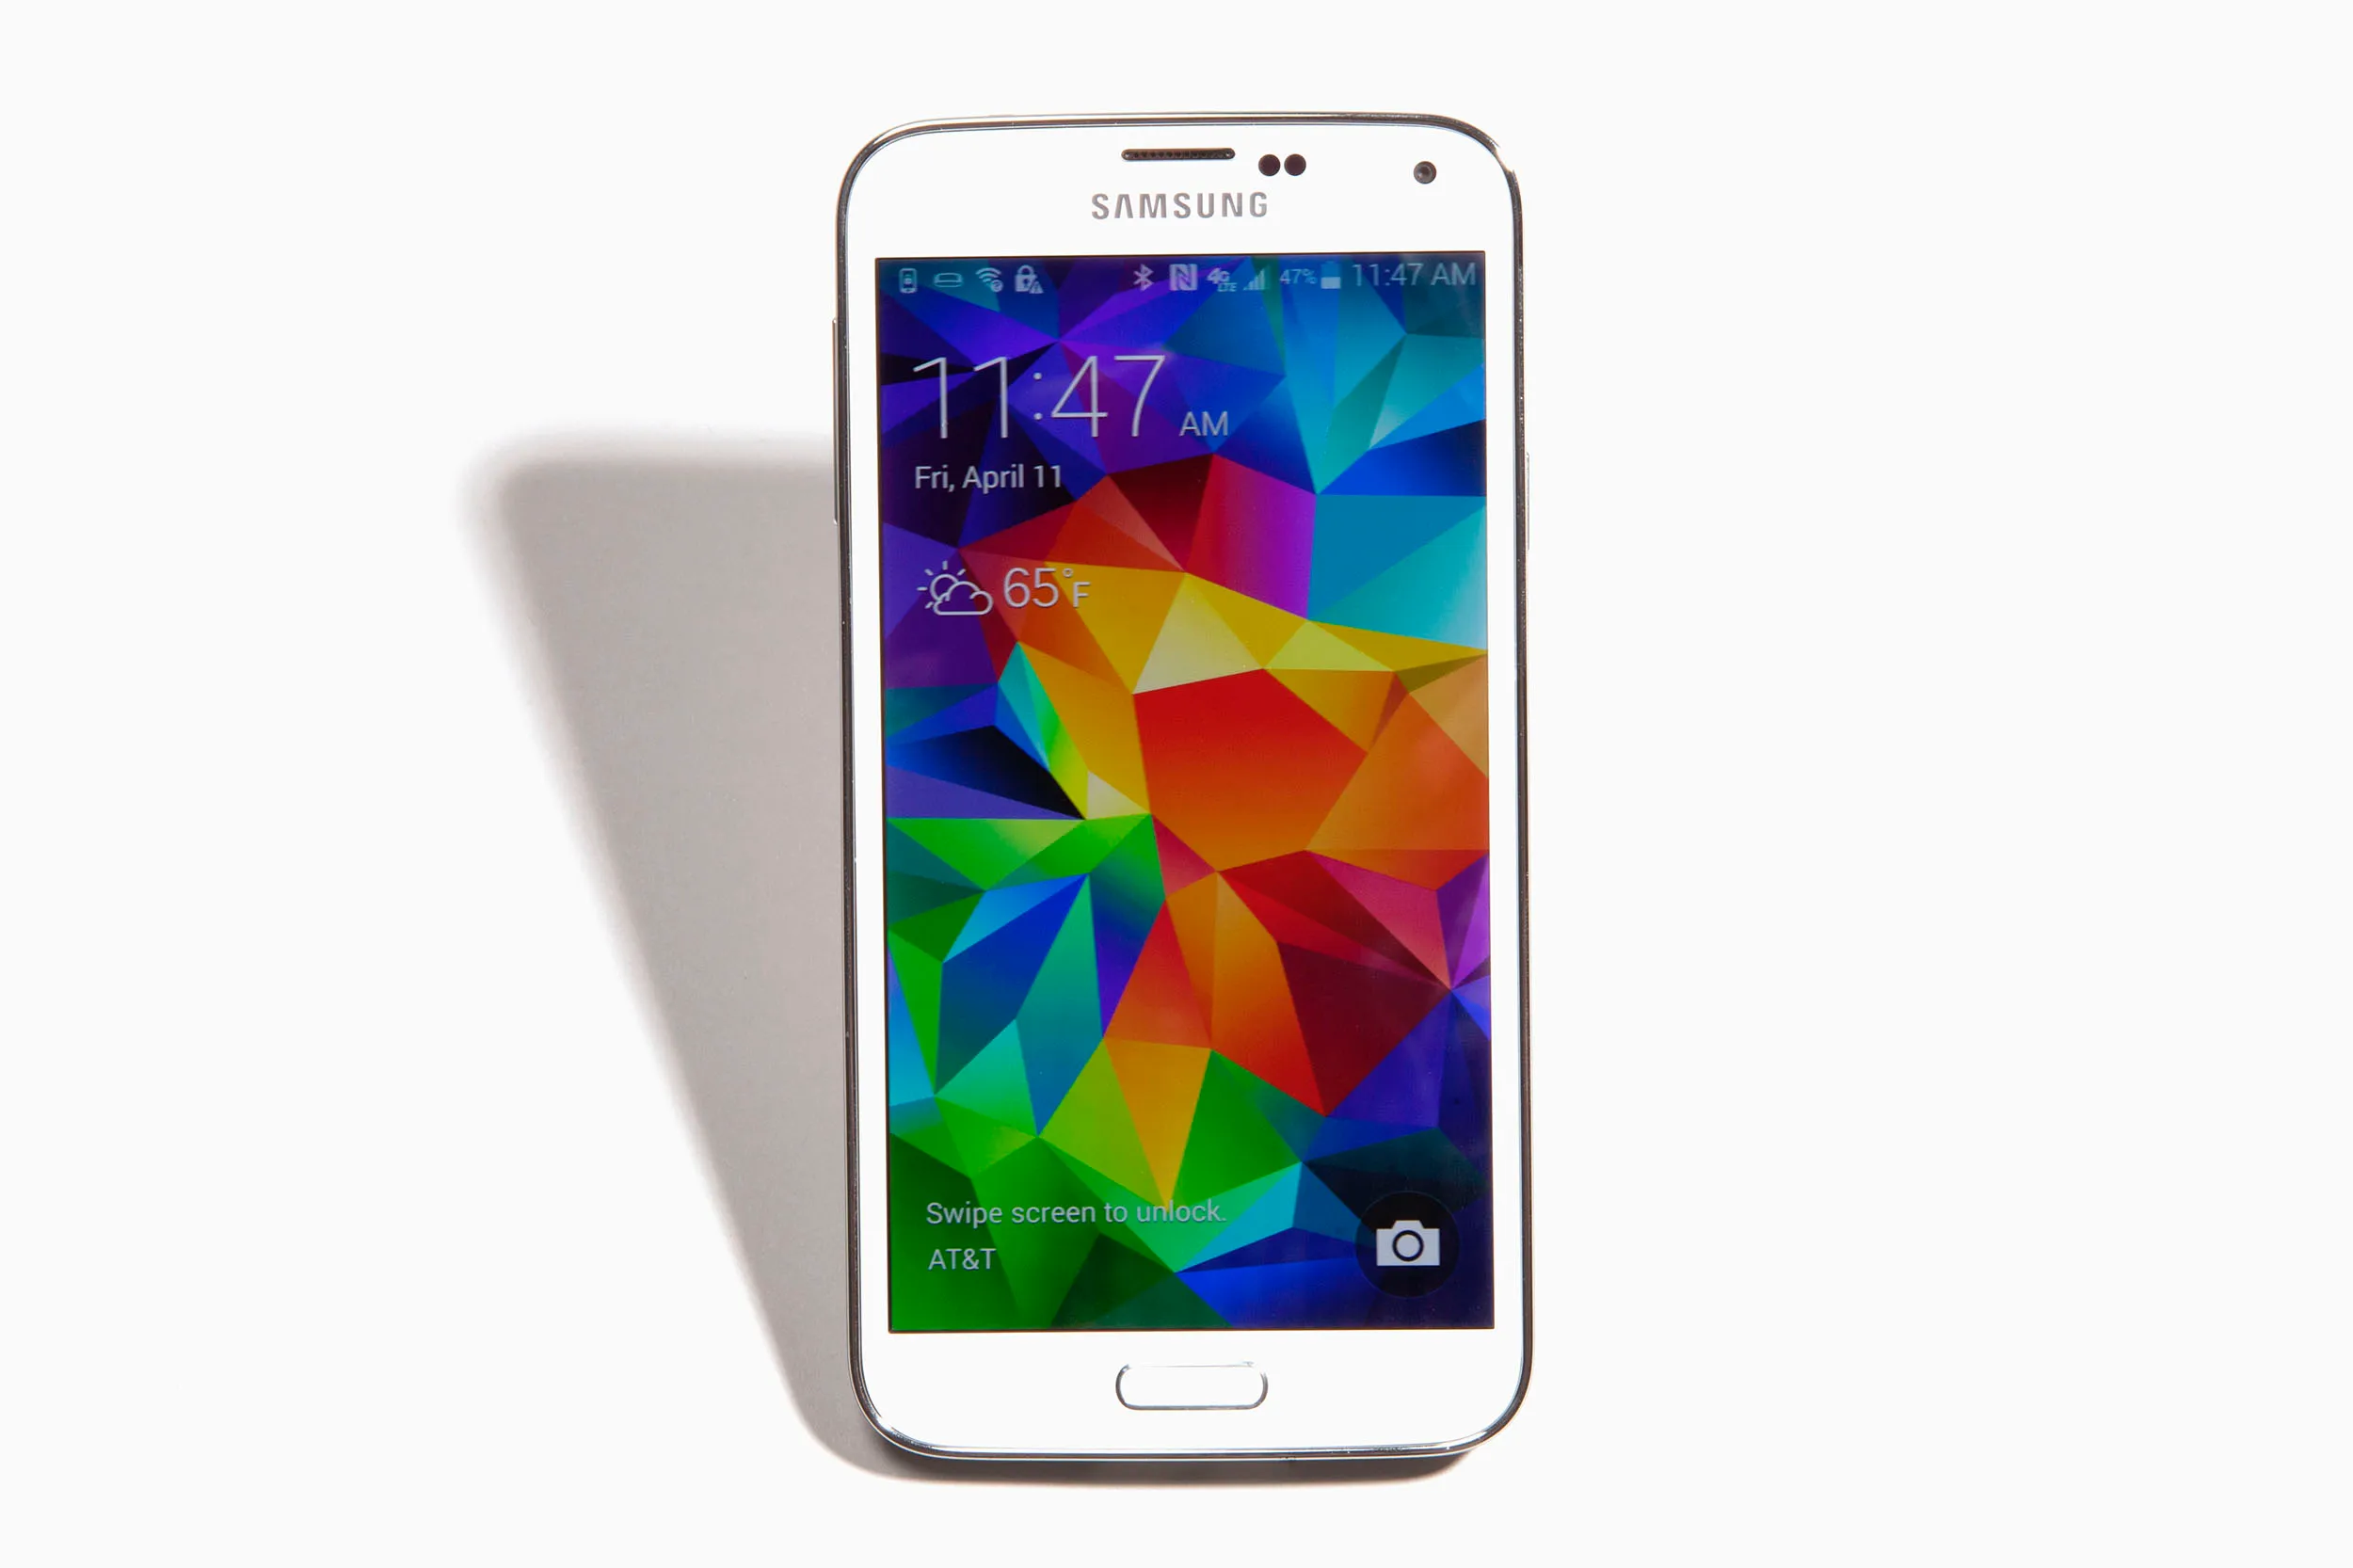 [Troubleshooting Guide] What to do if your Samsung Galaxy S5 continues rebooting on its own after the rooting method